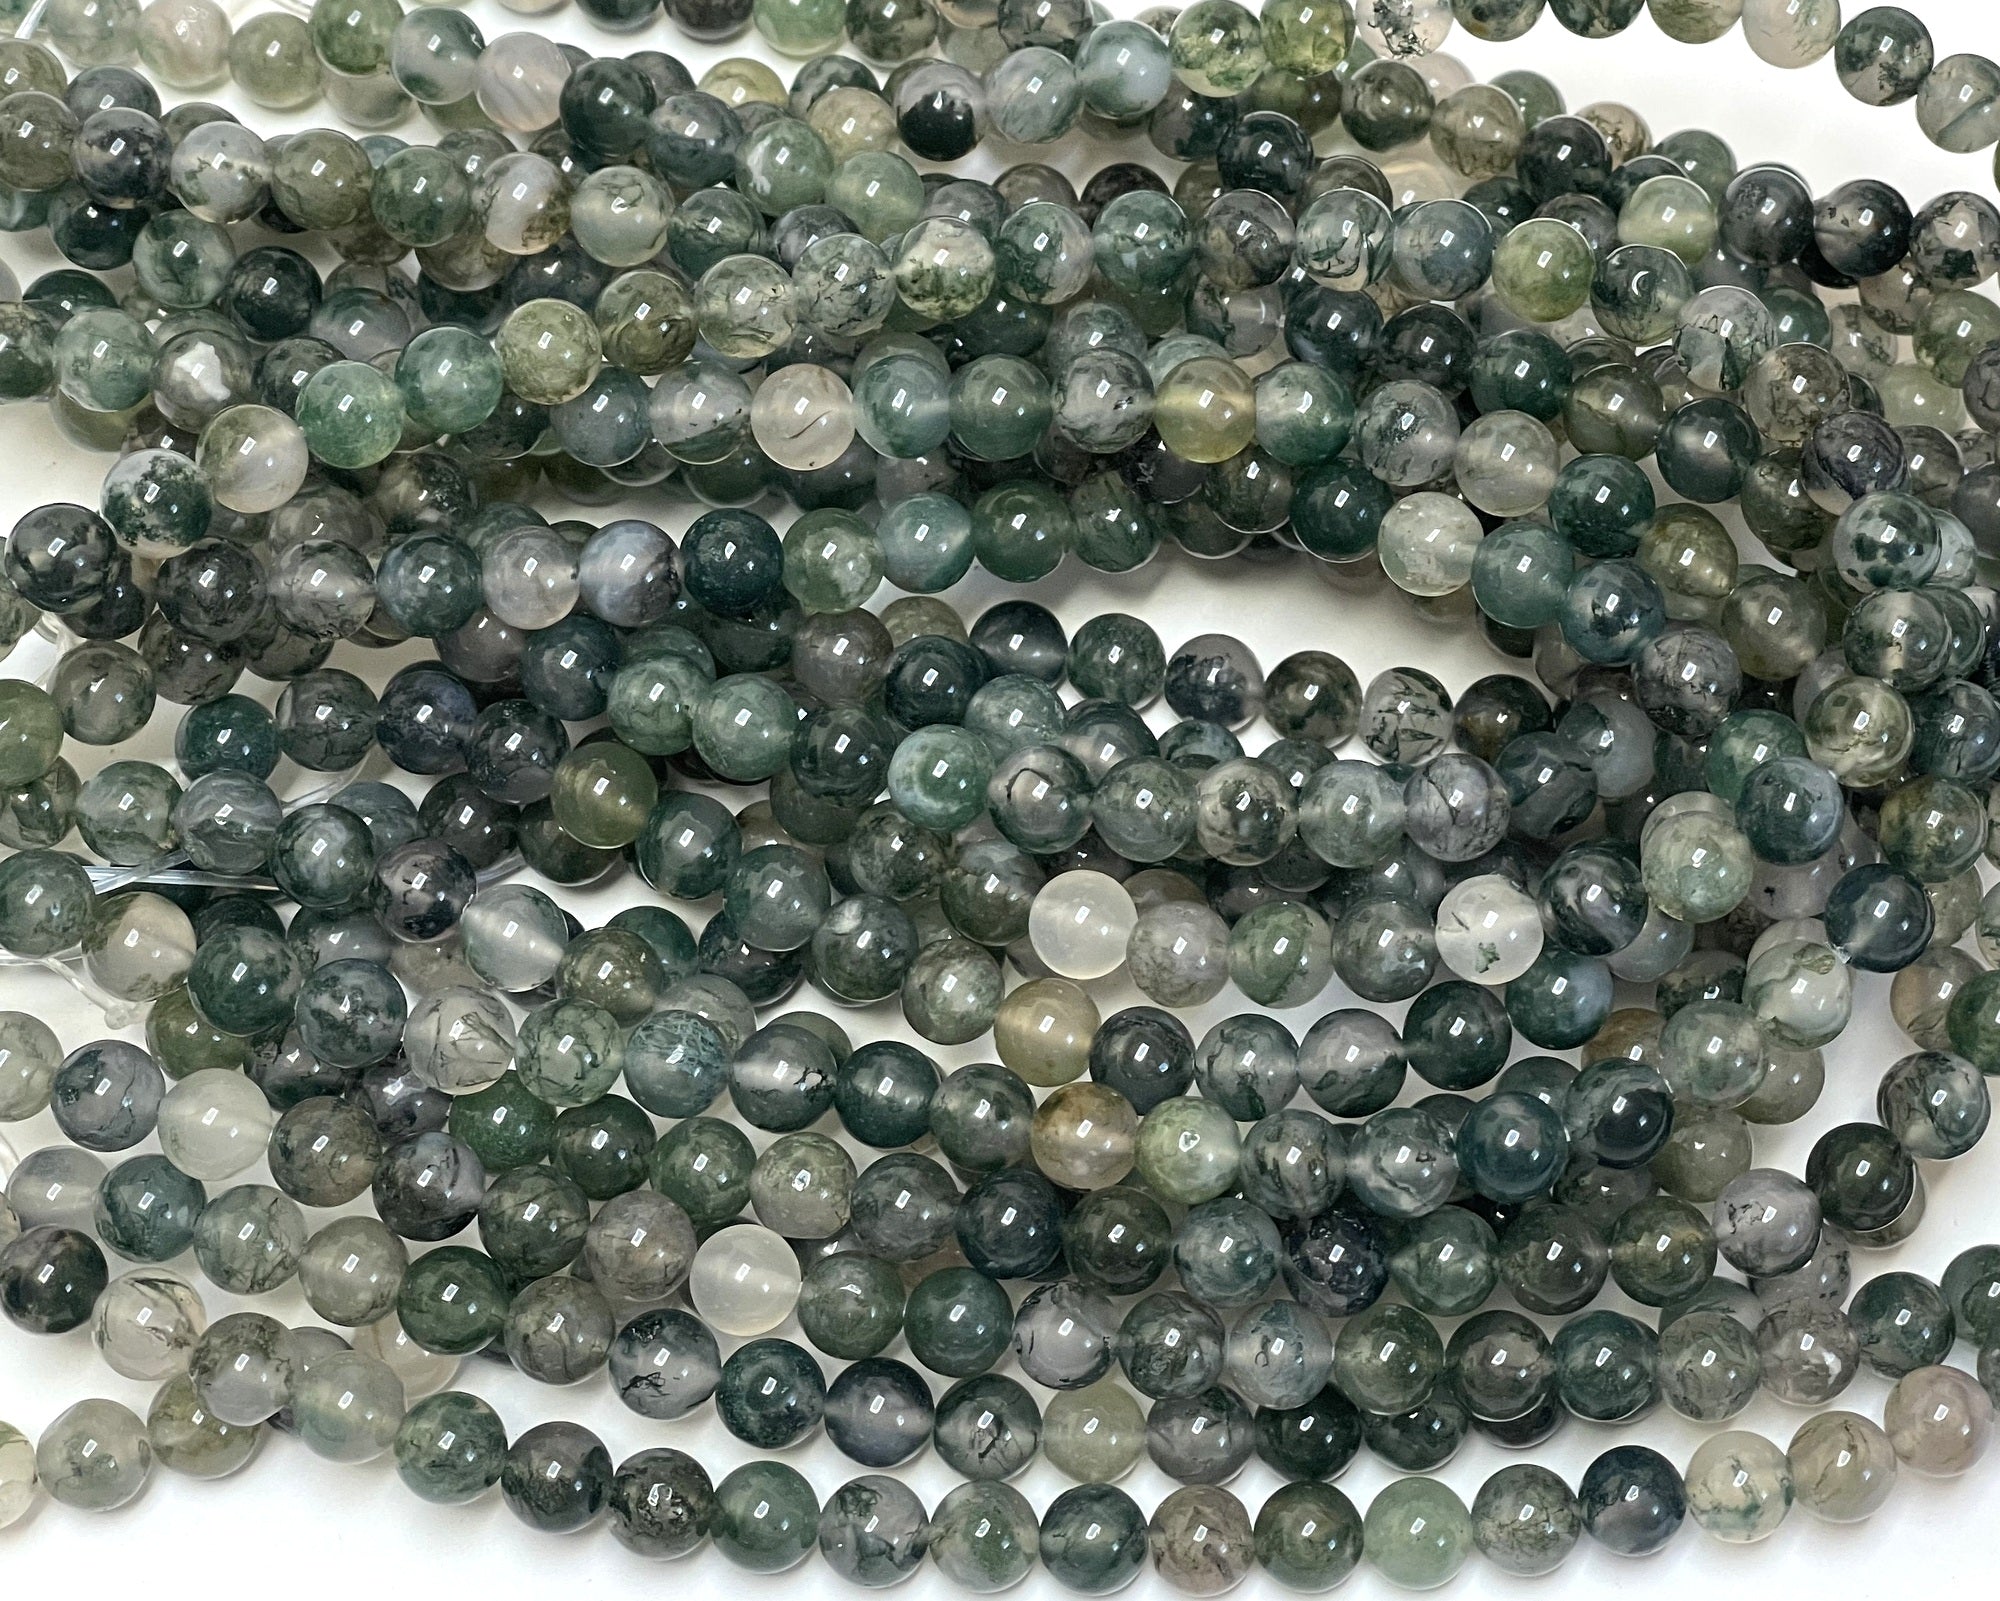 Dendritic Moss Agate 6mm round natural gemstone beads 15.5" strand